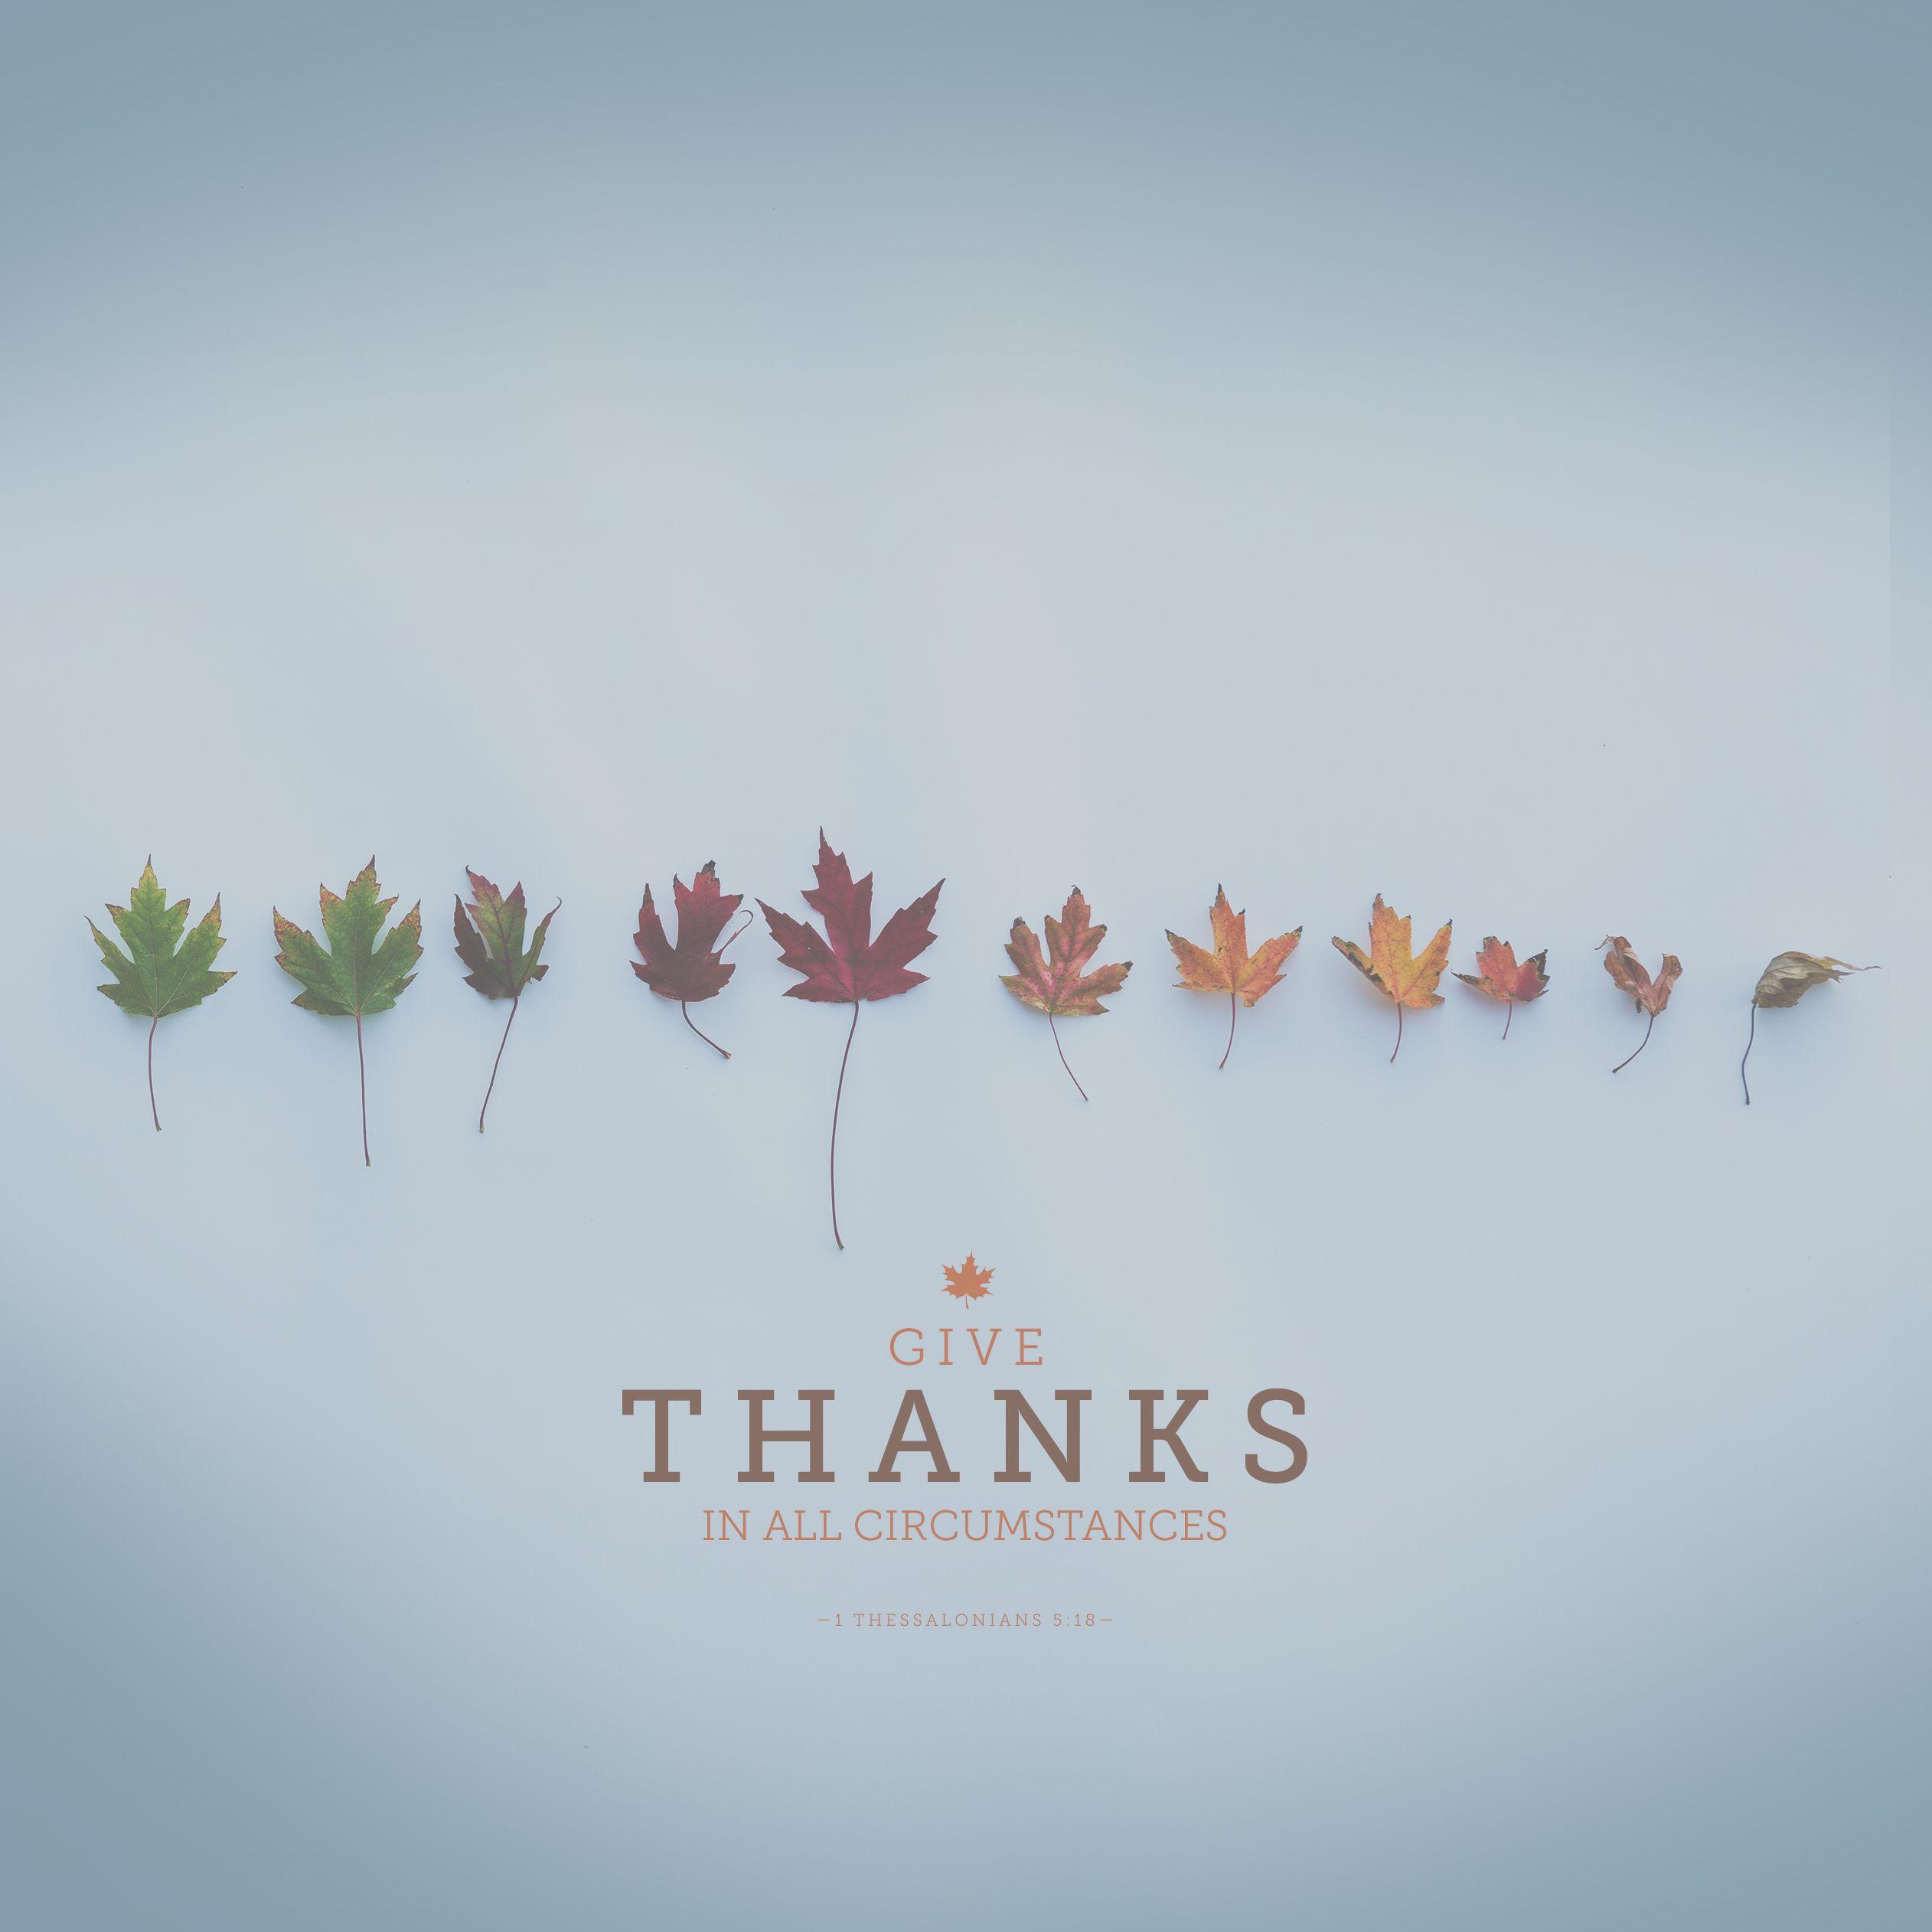 Wednesday Wallpaper: Give Thanks in All Circumstances